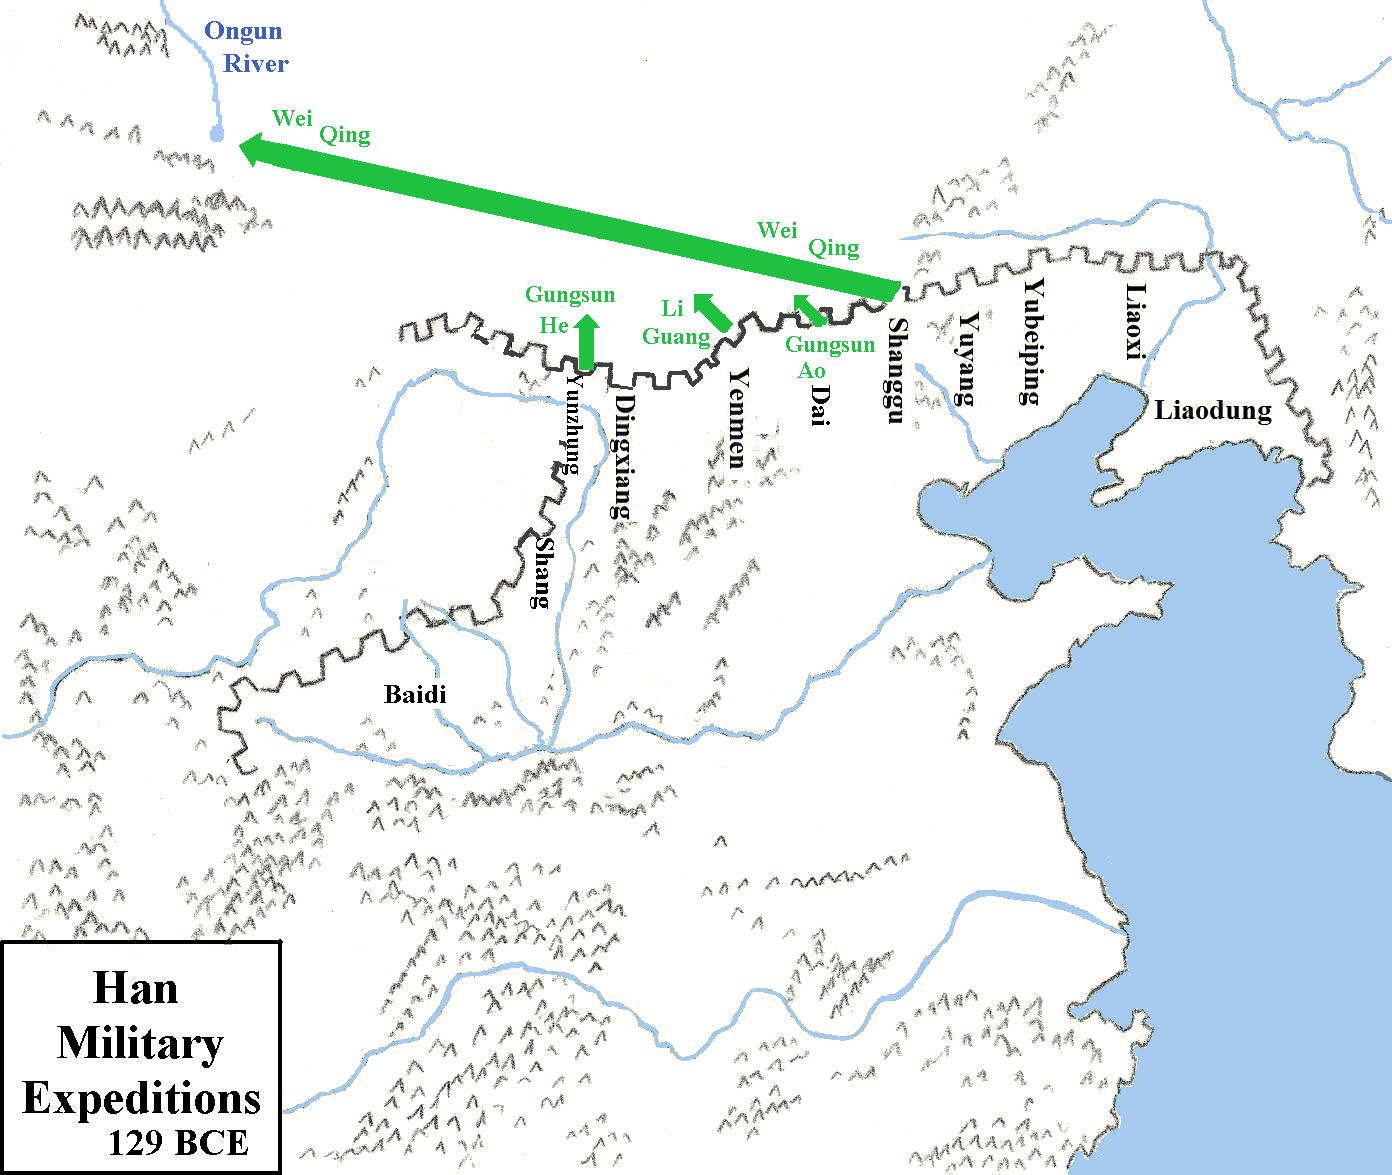 Map showing Chinese invasions in 129 BCE